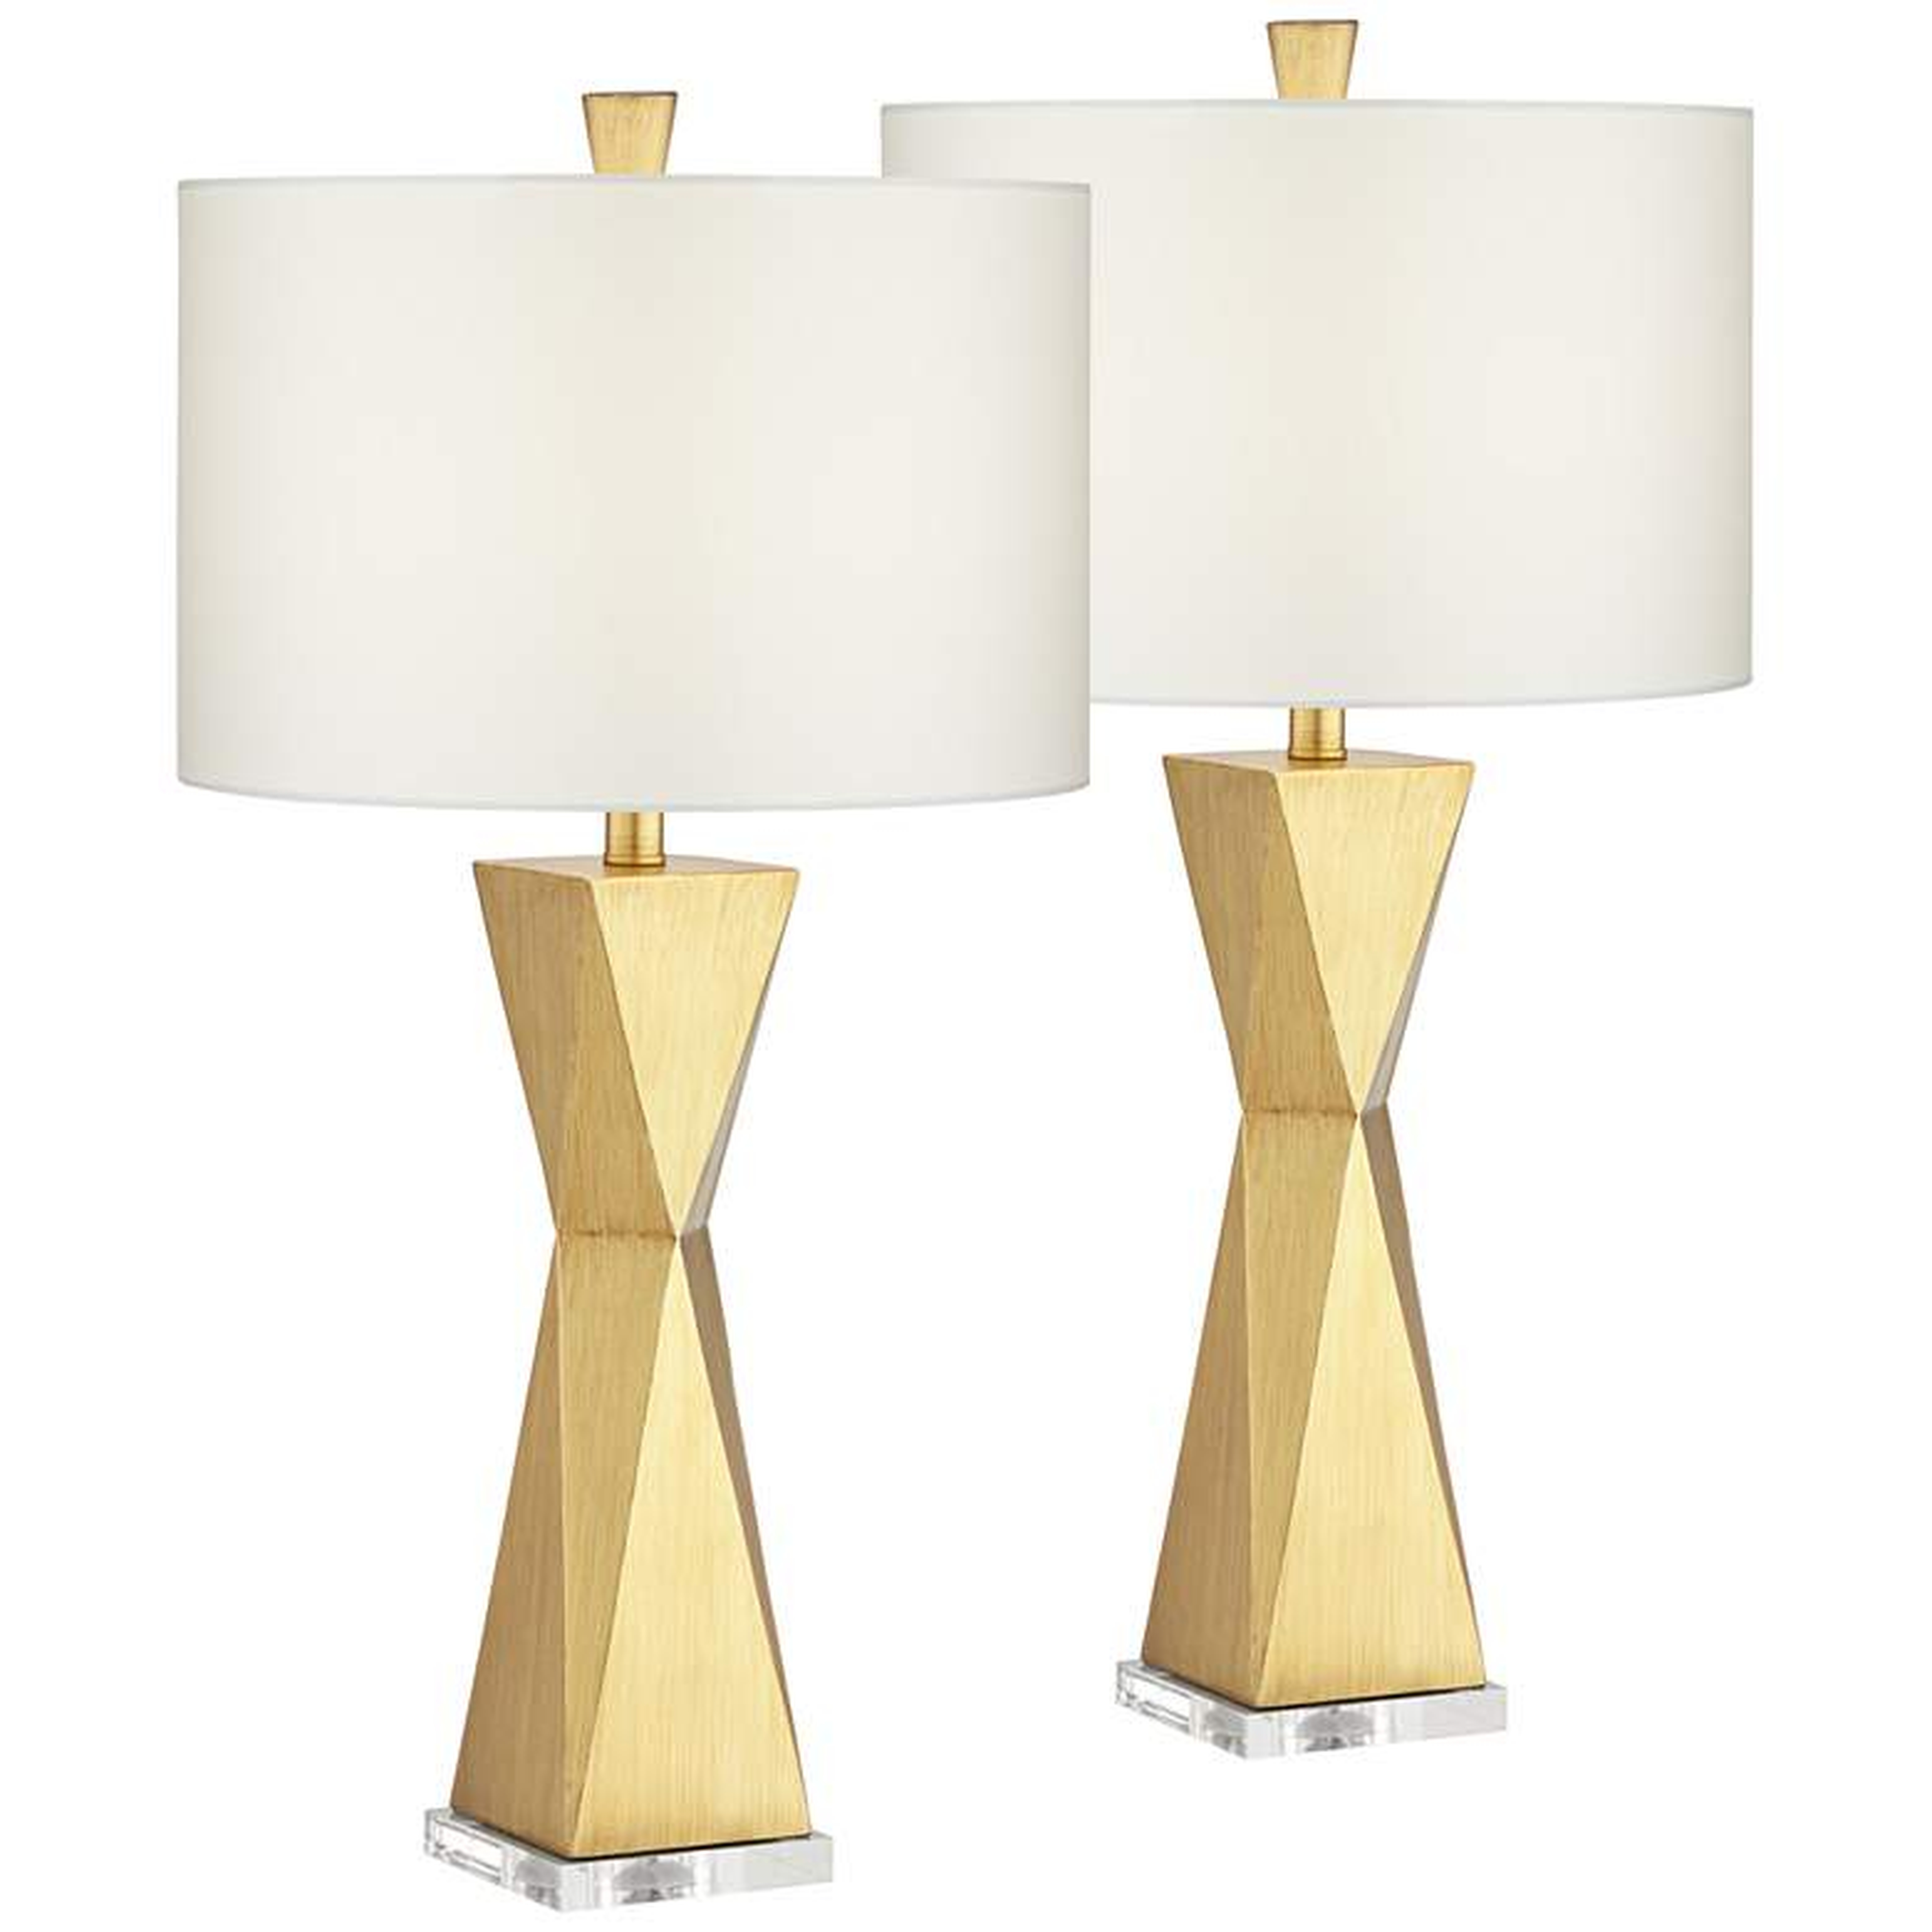 Kalso Brushed Gold Quadrangle Table Lamps Set of 2 - Style # 68R13 - Lamps Plus